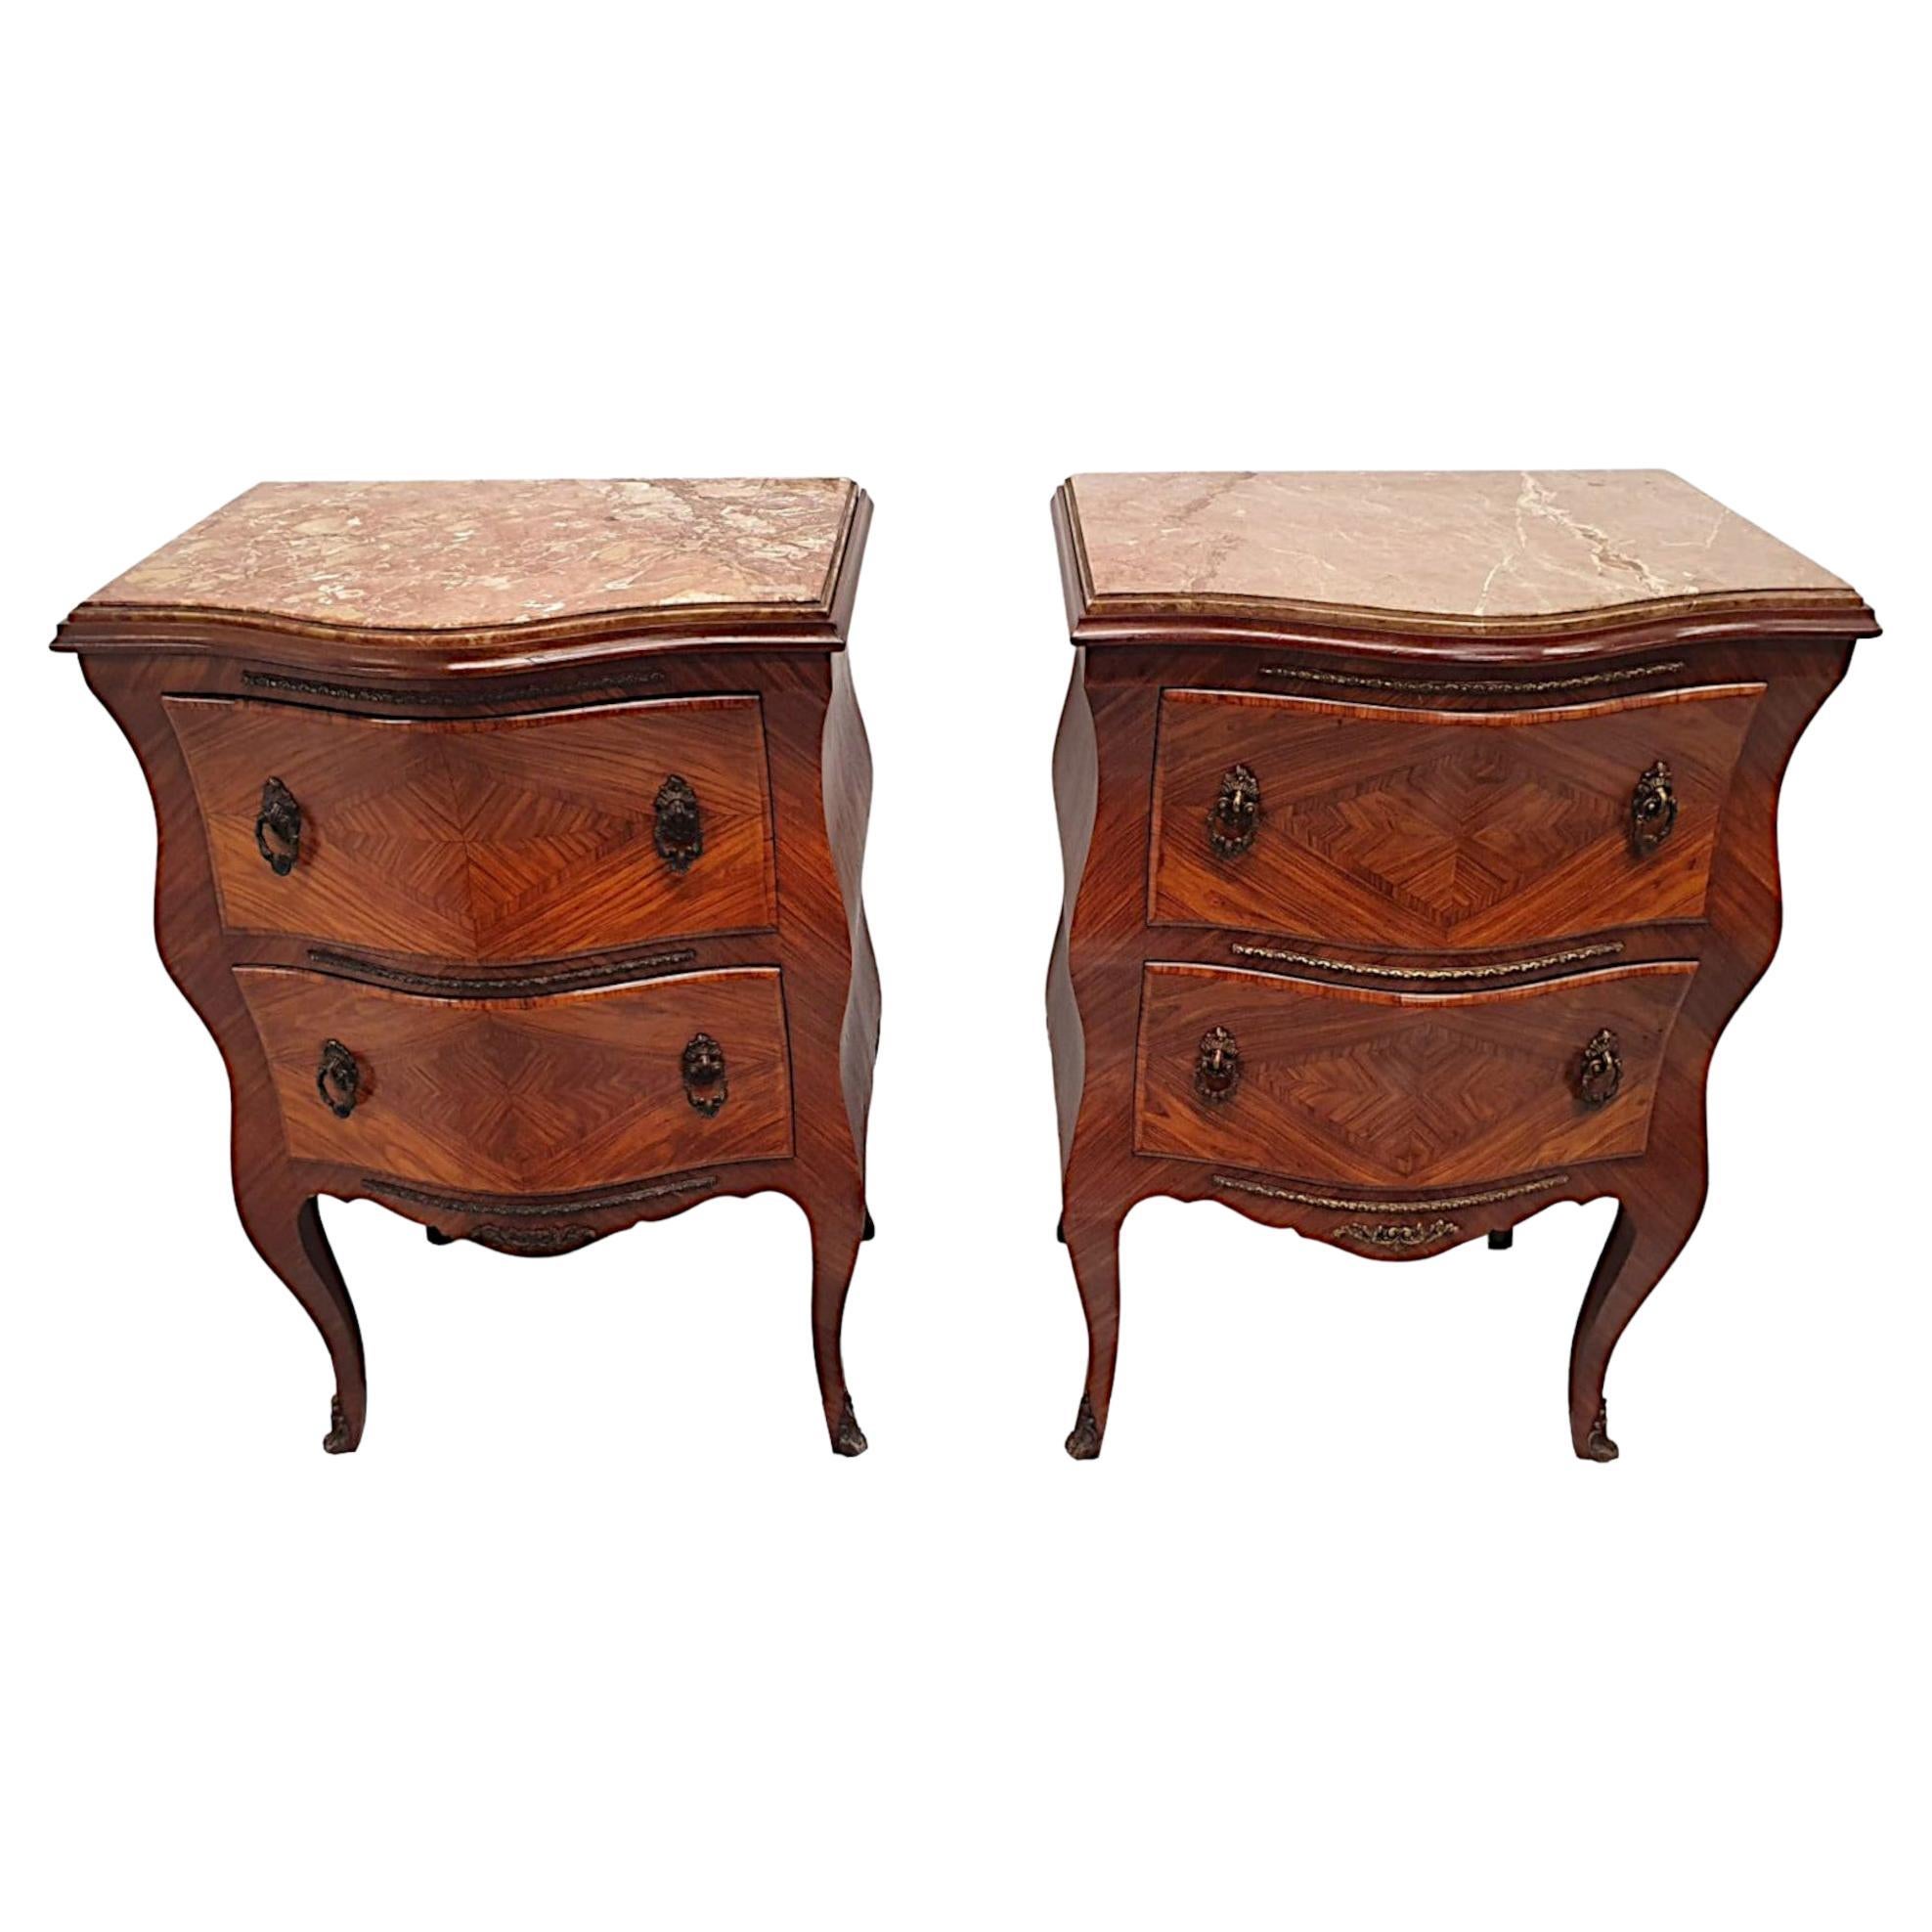 Very Fine 19th Century Pair of Large Marble Top Chests For Sale